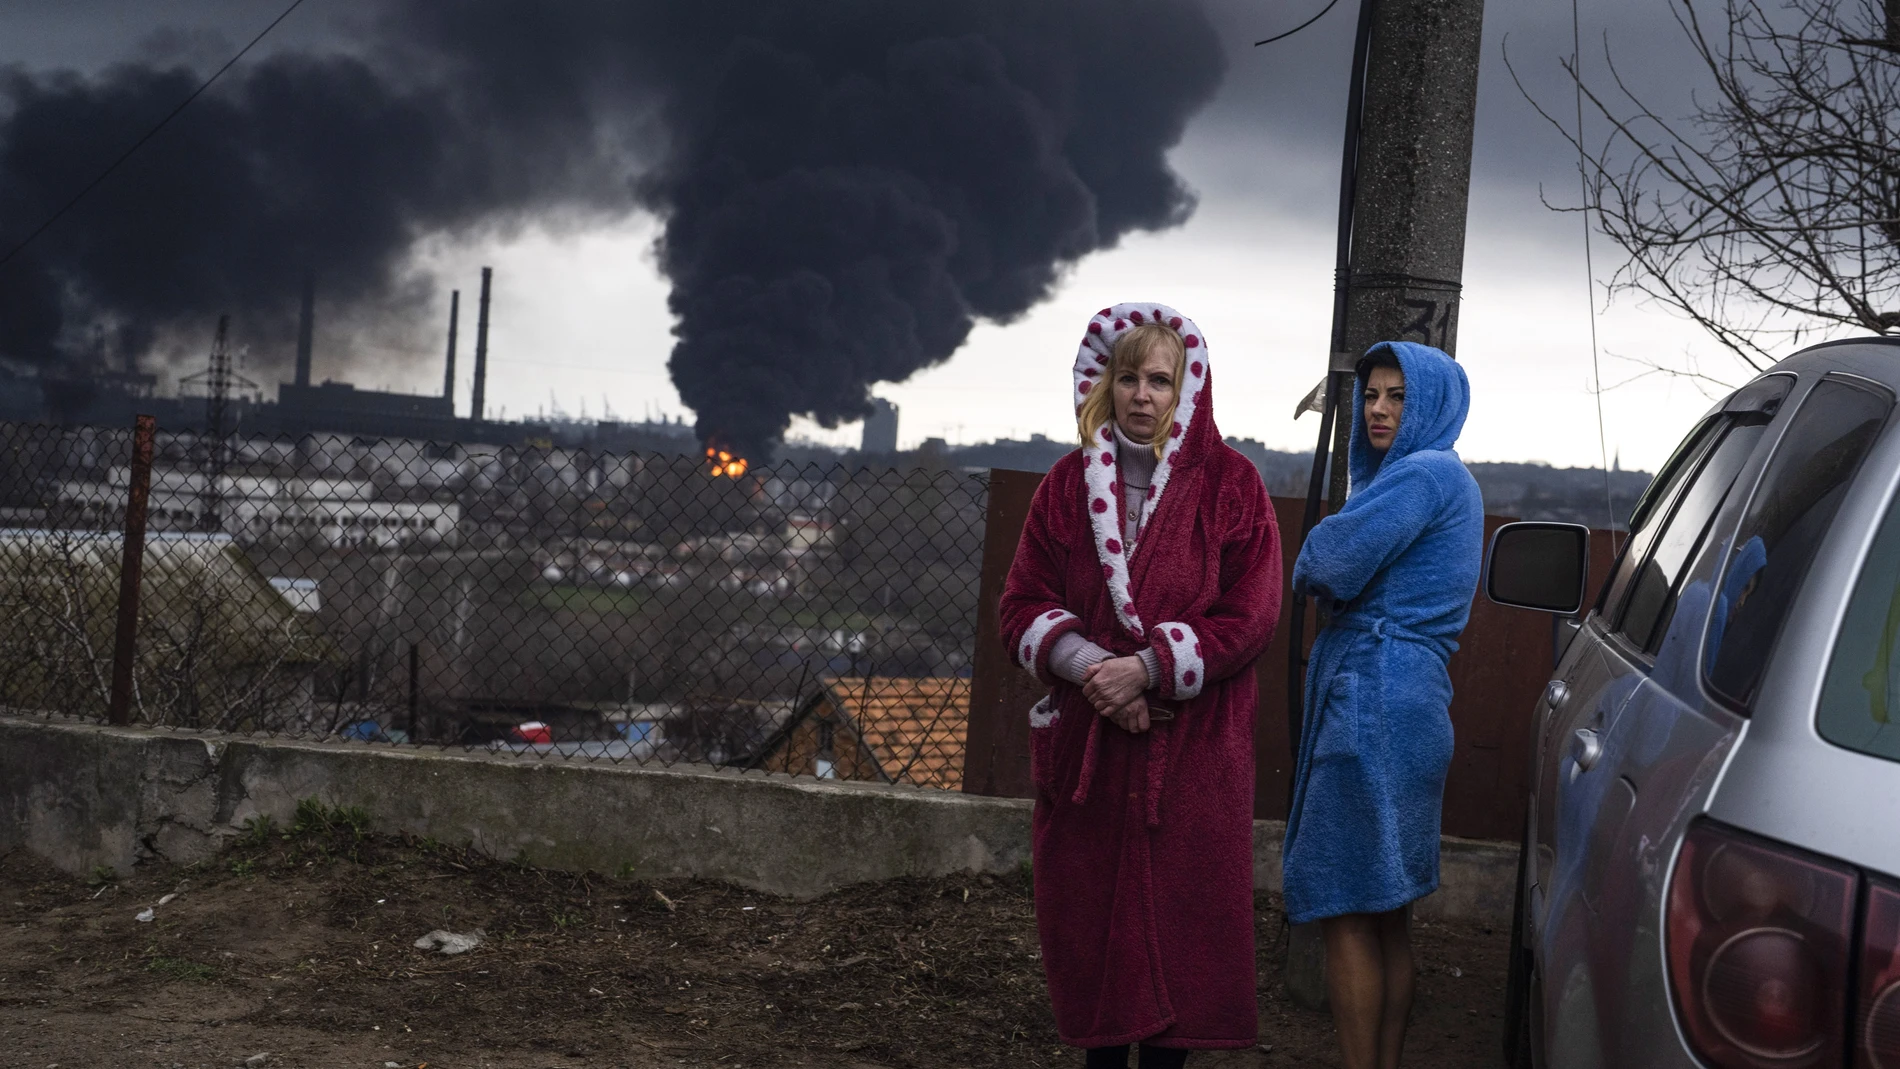 Women stand in their robes as smoke rises in the background after shelling in Odesa, Ukraine, Sunday, April 3, 2022. (AP Photo/Petros Giannakouris)